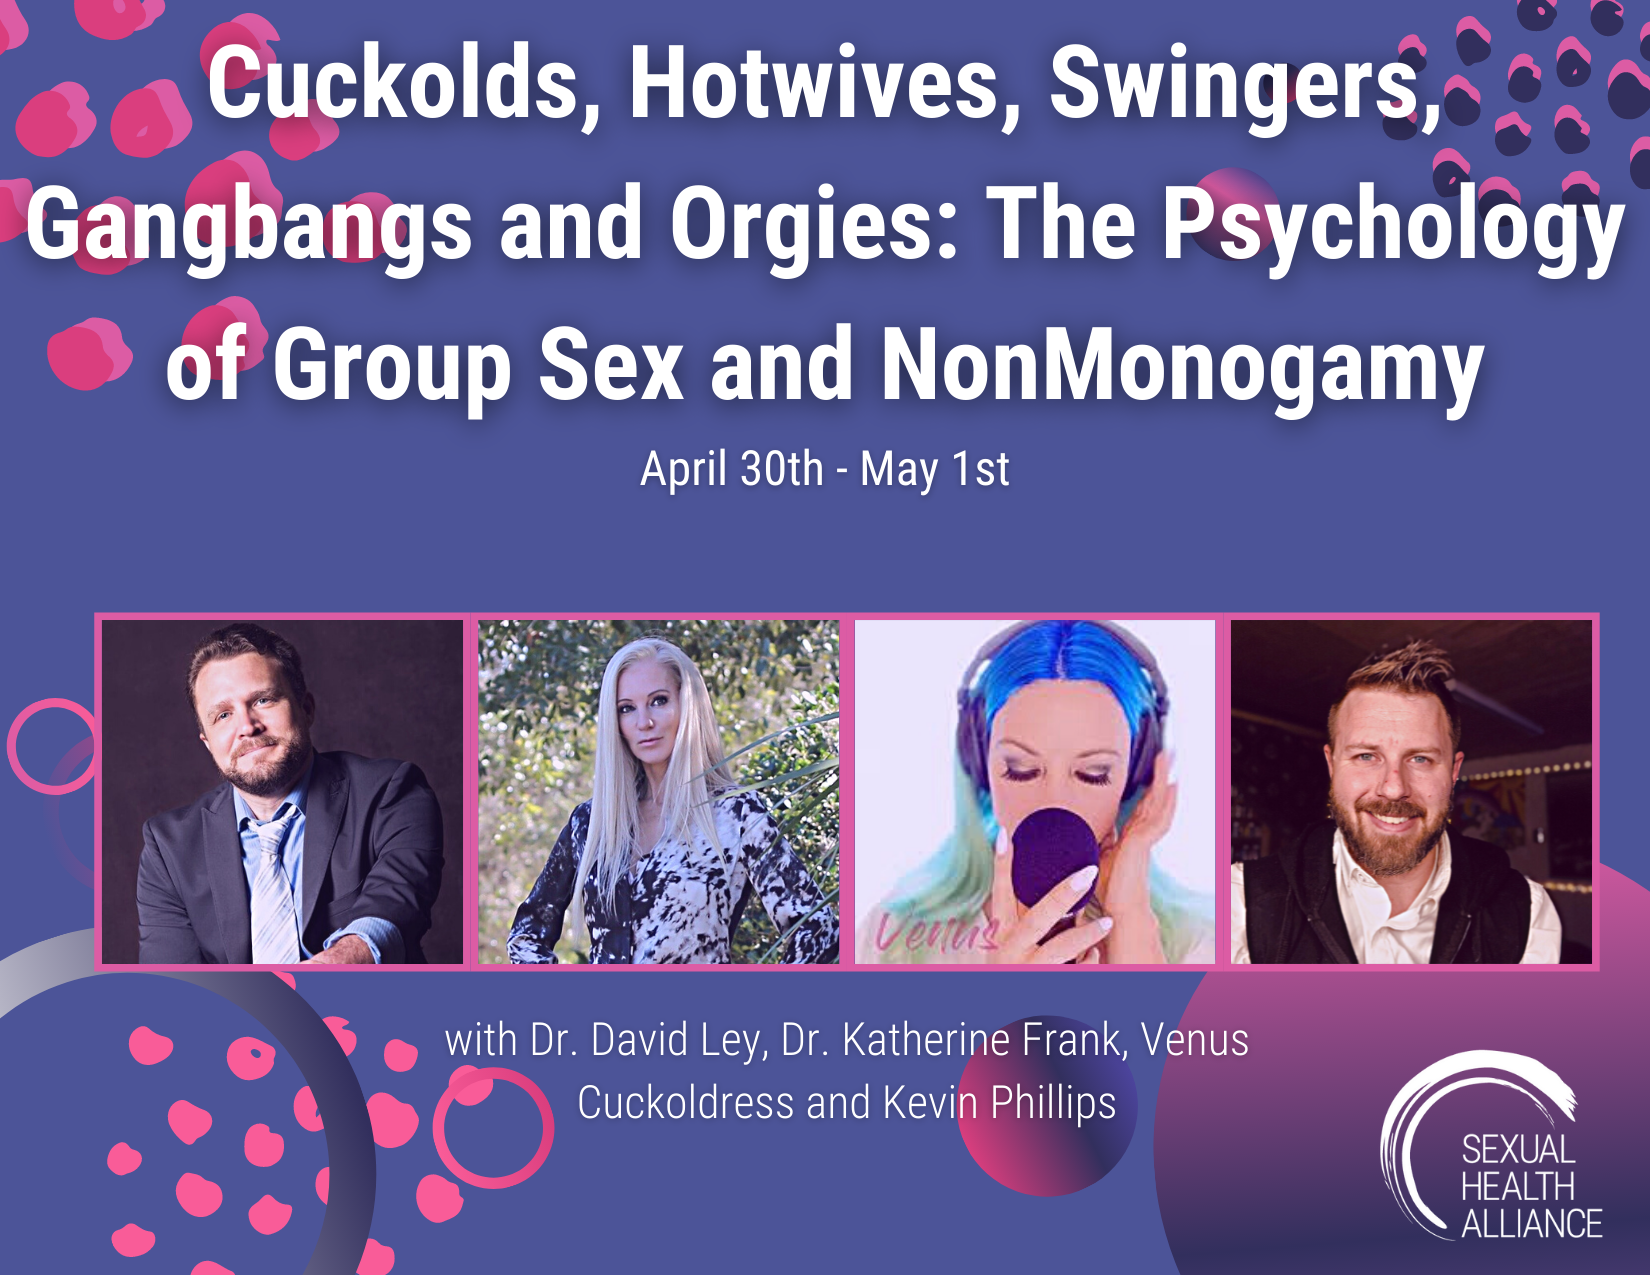 The Psychology of Group Sex and Non-Monogamy Cuckolds, Hotwives, Swingers, Gangbangs and Orgies — Sexual Health Alliance